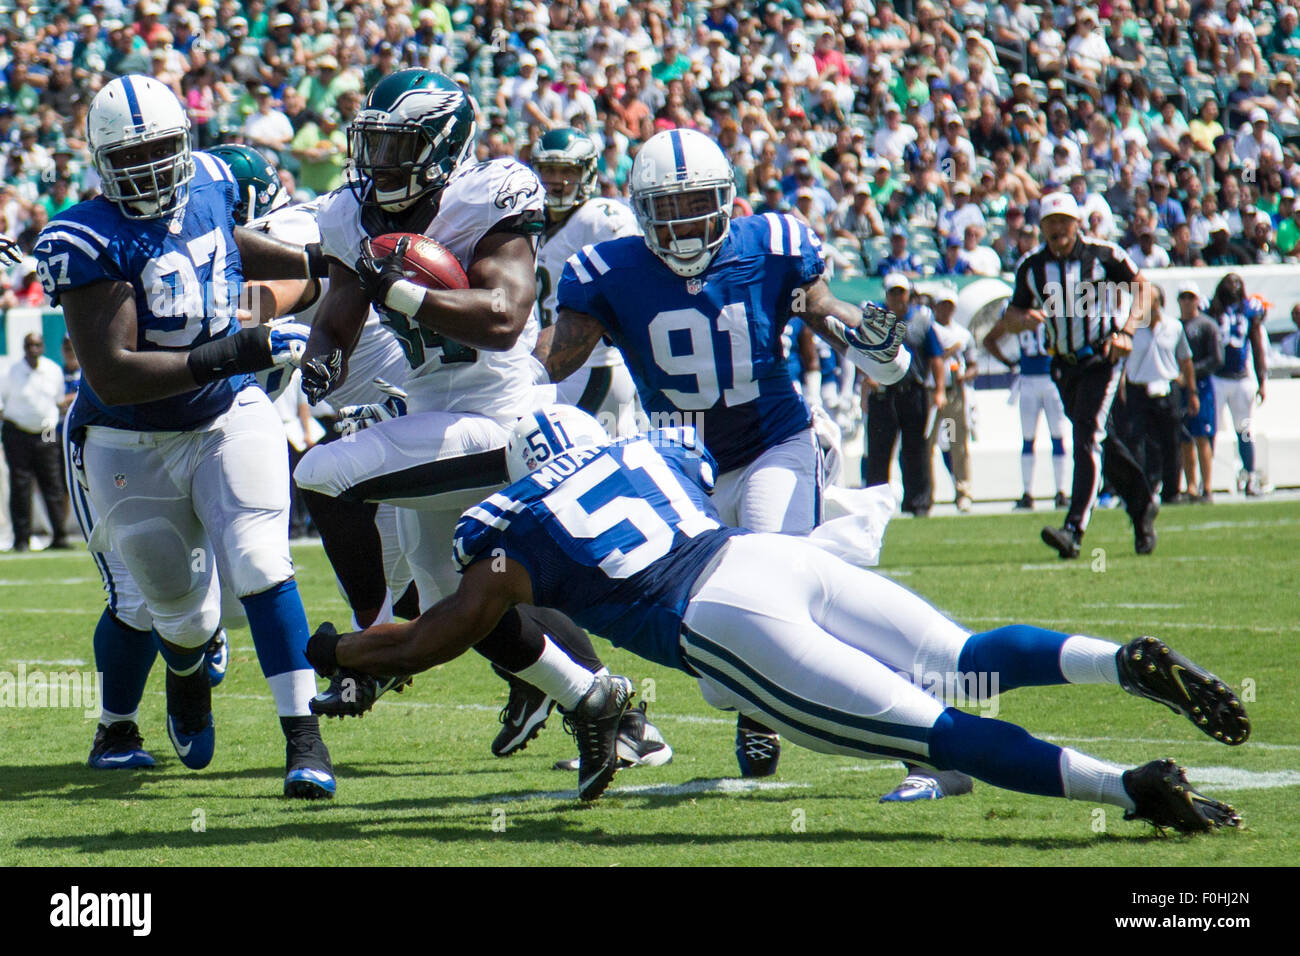 Philadelphia, Pennsylvania, USA. 16th Aug, 2015. Philadelphia Eagles running back Kenjon Barner (34) runs with the ball on his way to a touchdown while surrounded by Indianapolis Colts, defensive end Arthur Jones (97), linebacker Henoc Muamba (51) and outside linebacker Jonathan Newsome (91) during the NFL game between the Indianapolis Colts and the Philadelphia Eagles at Lincoln Financial Field in Philadelphia, Pennsylvania. Christopher Szagola/CSM/Alamy Live News Stock Photo